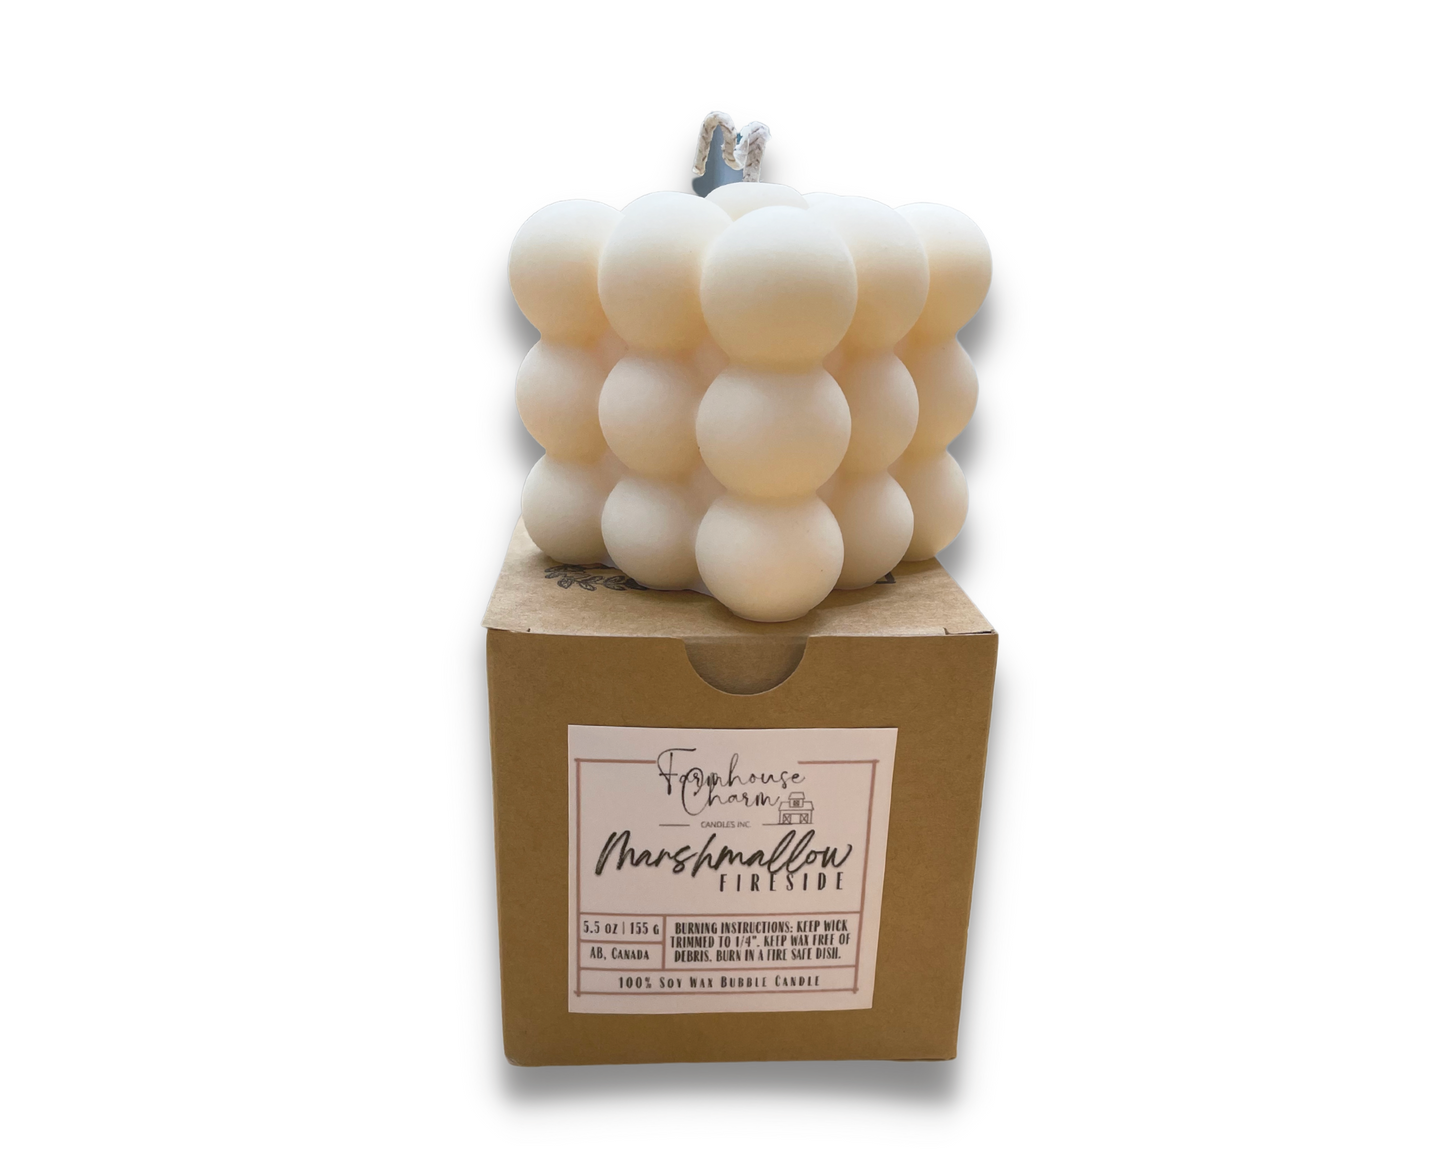 This is one of our signature blend. Marshmallow Fireside Bubble Soy Candle-Farmhouse Charm is a perfect combination of sweet and creamy marshmallow and oak fire.   Marshmallow Fireside Bubble Soy Candle-Farmhouse Charm is made with 100% natural soy wax which is biodegradable and sustainable. This candle uses cotton wick. Fragrance is guaranteed to be paraben free and phthalate free. It is dye free which gives it pure white color